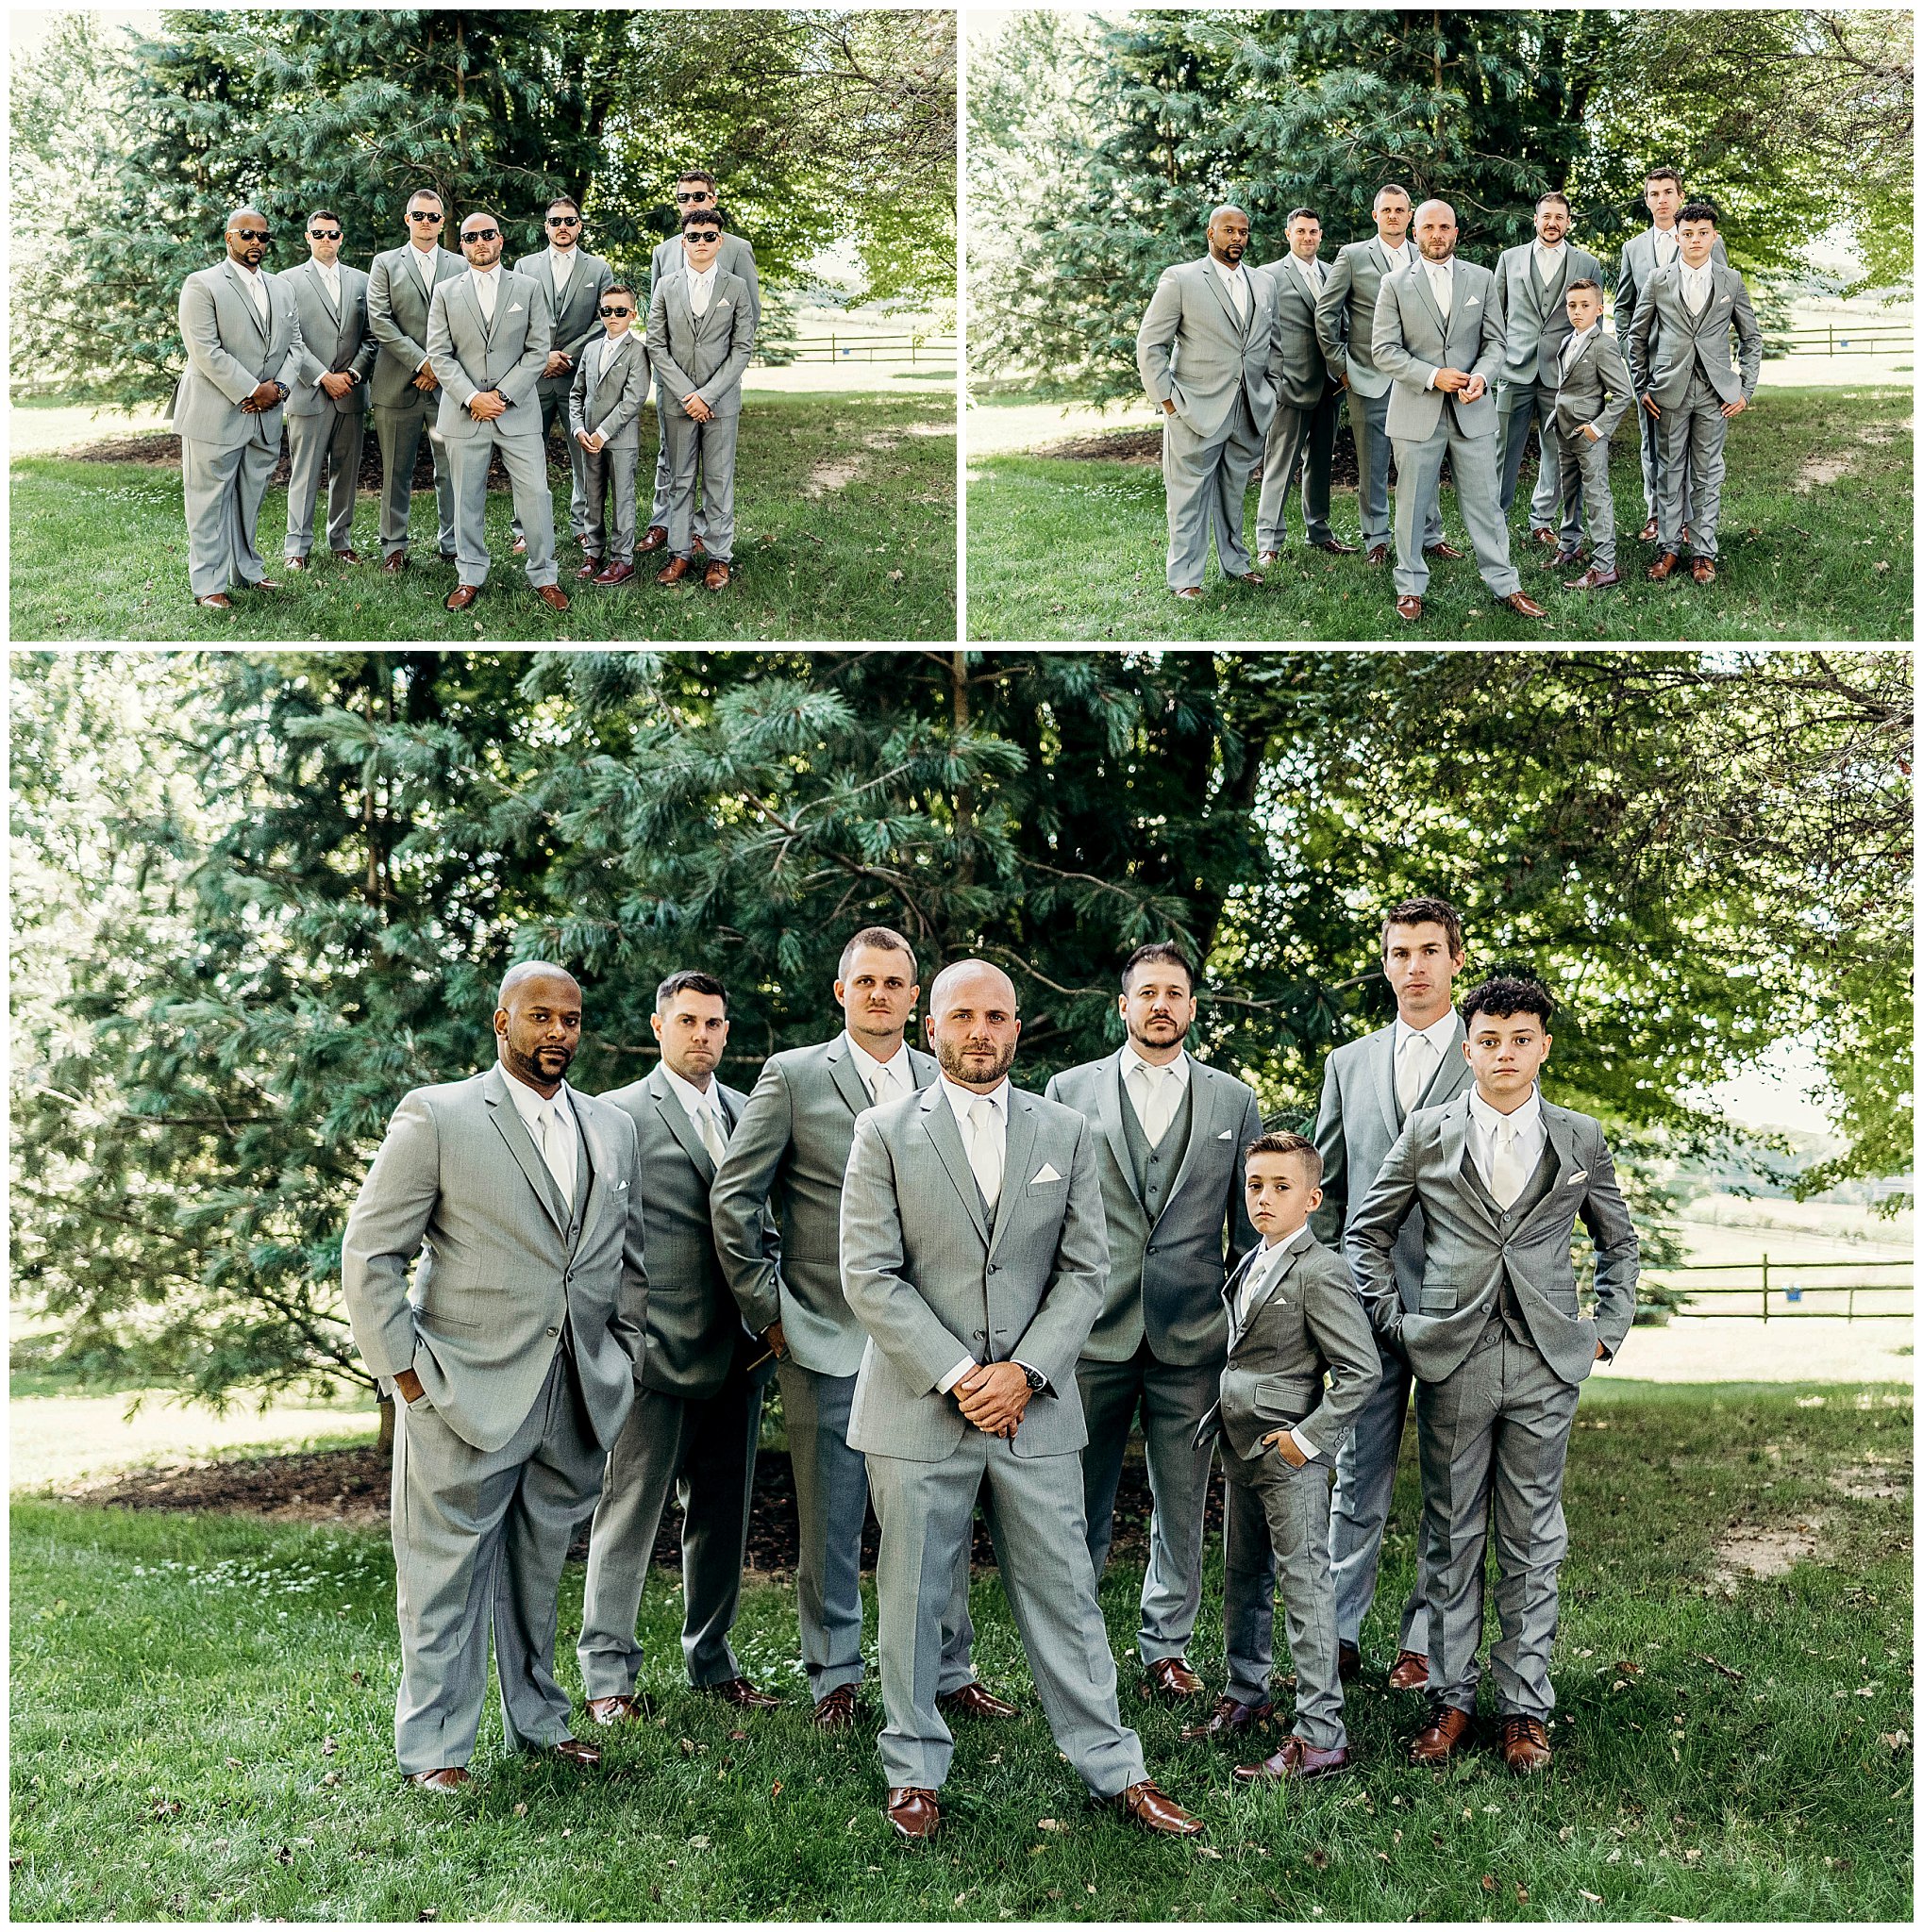 Groom and Groomsmen photos at Rustic Acres Farm